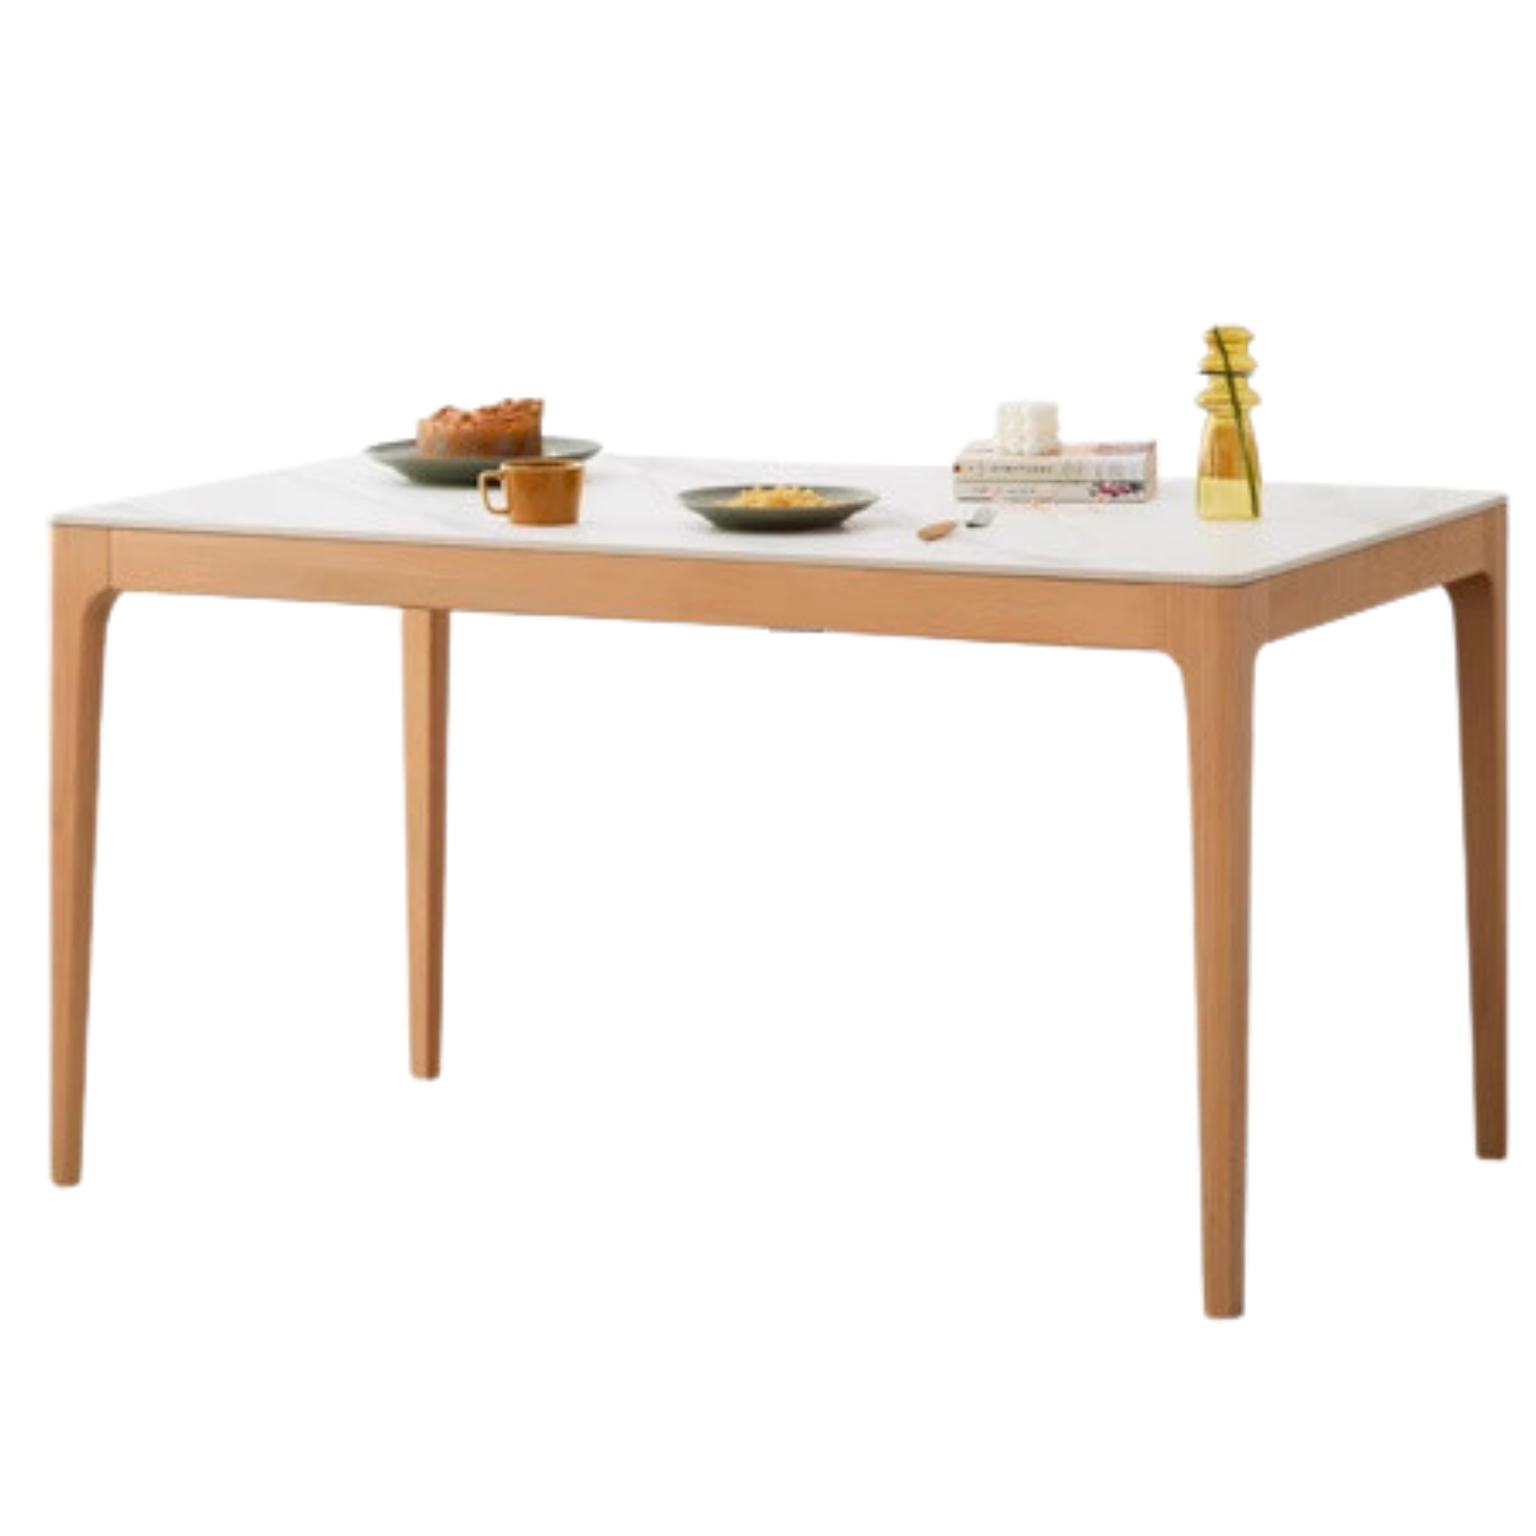 Beech solid wood slate dining table rectangular -